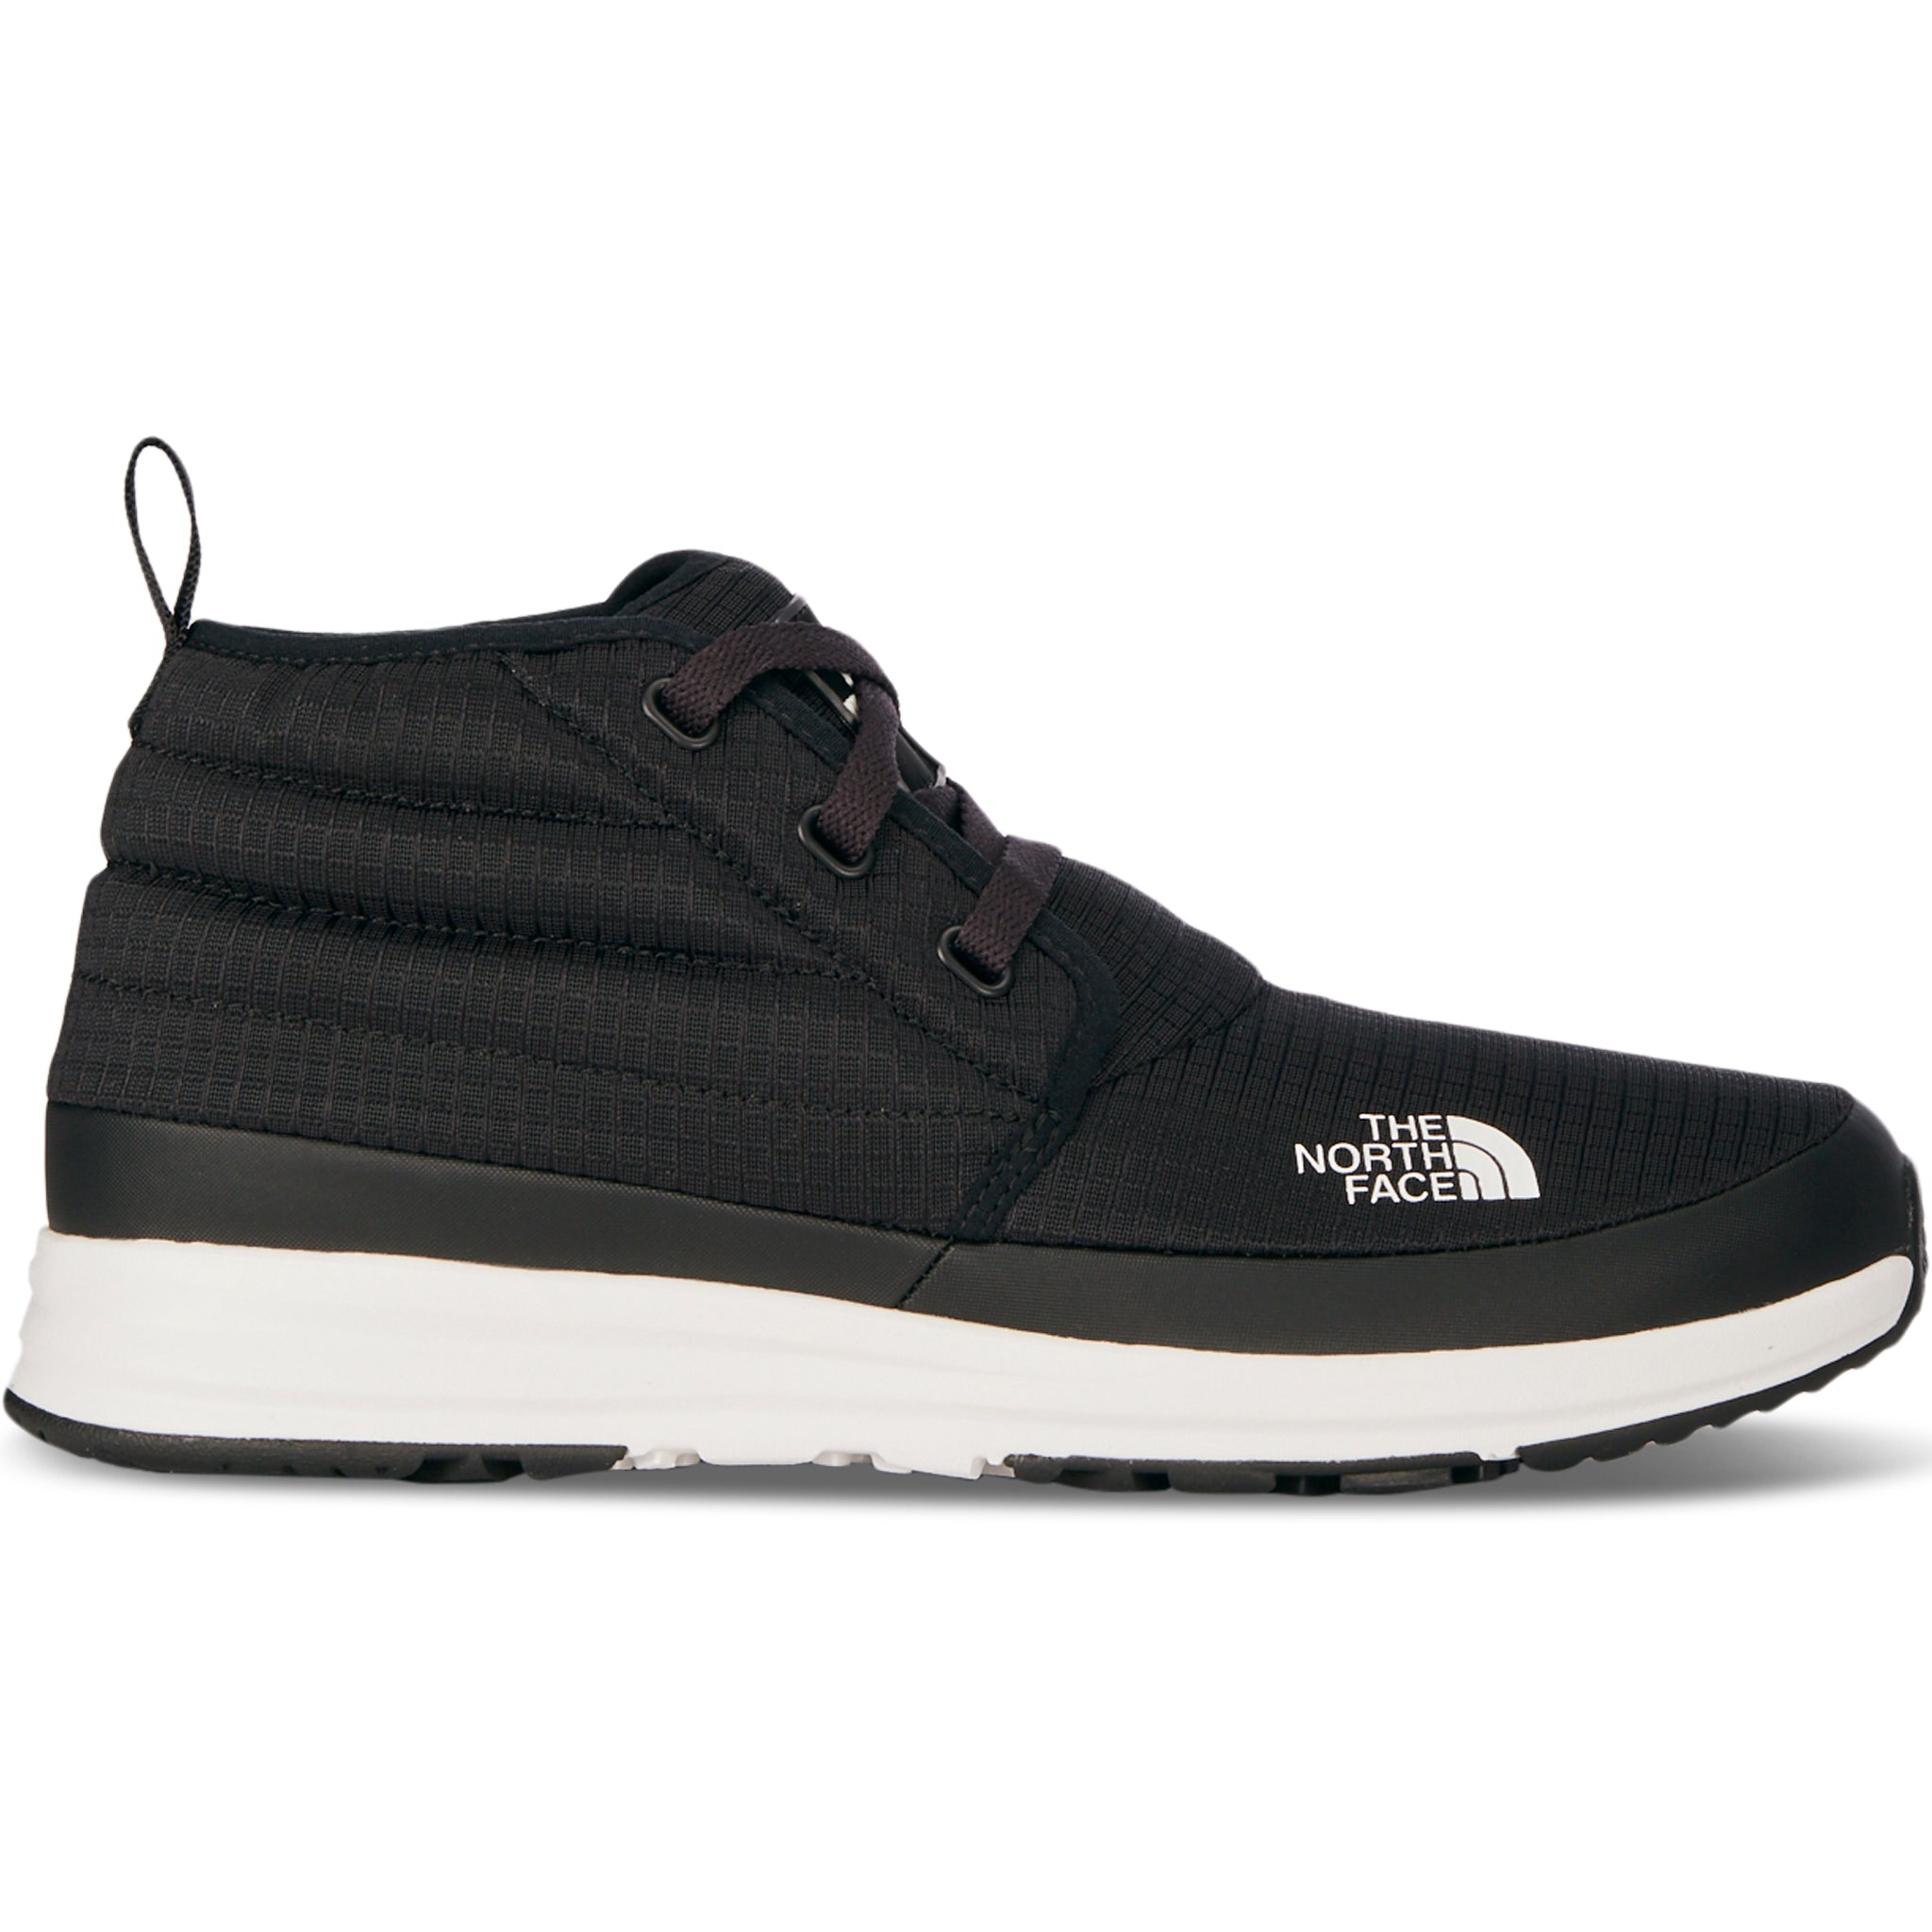 The North Face Men's Cadman NSE 